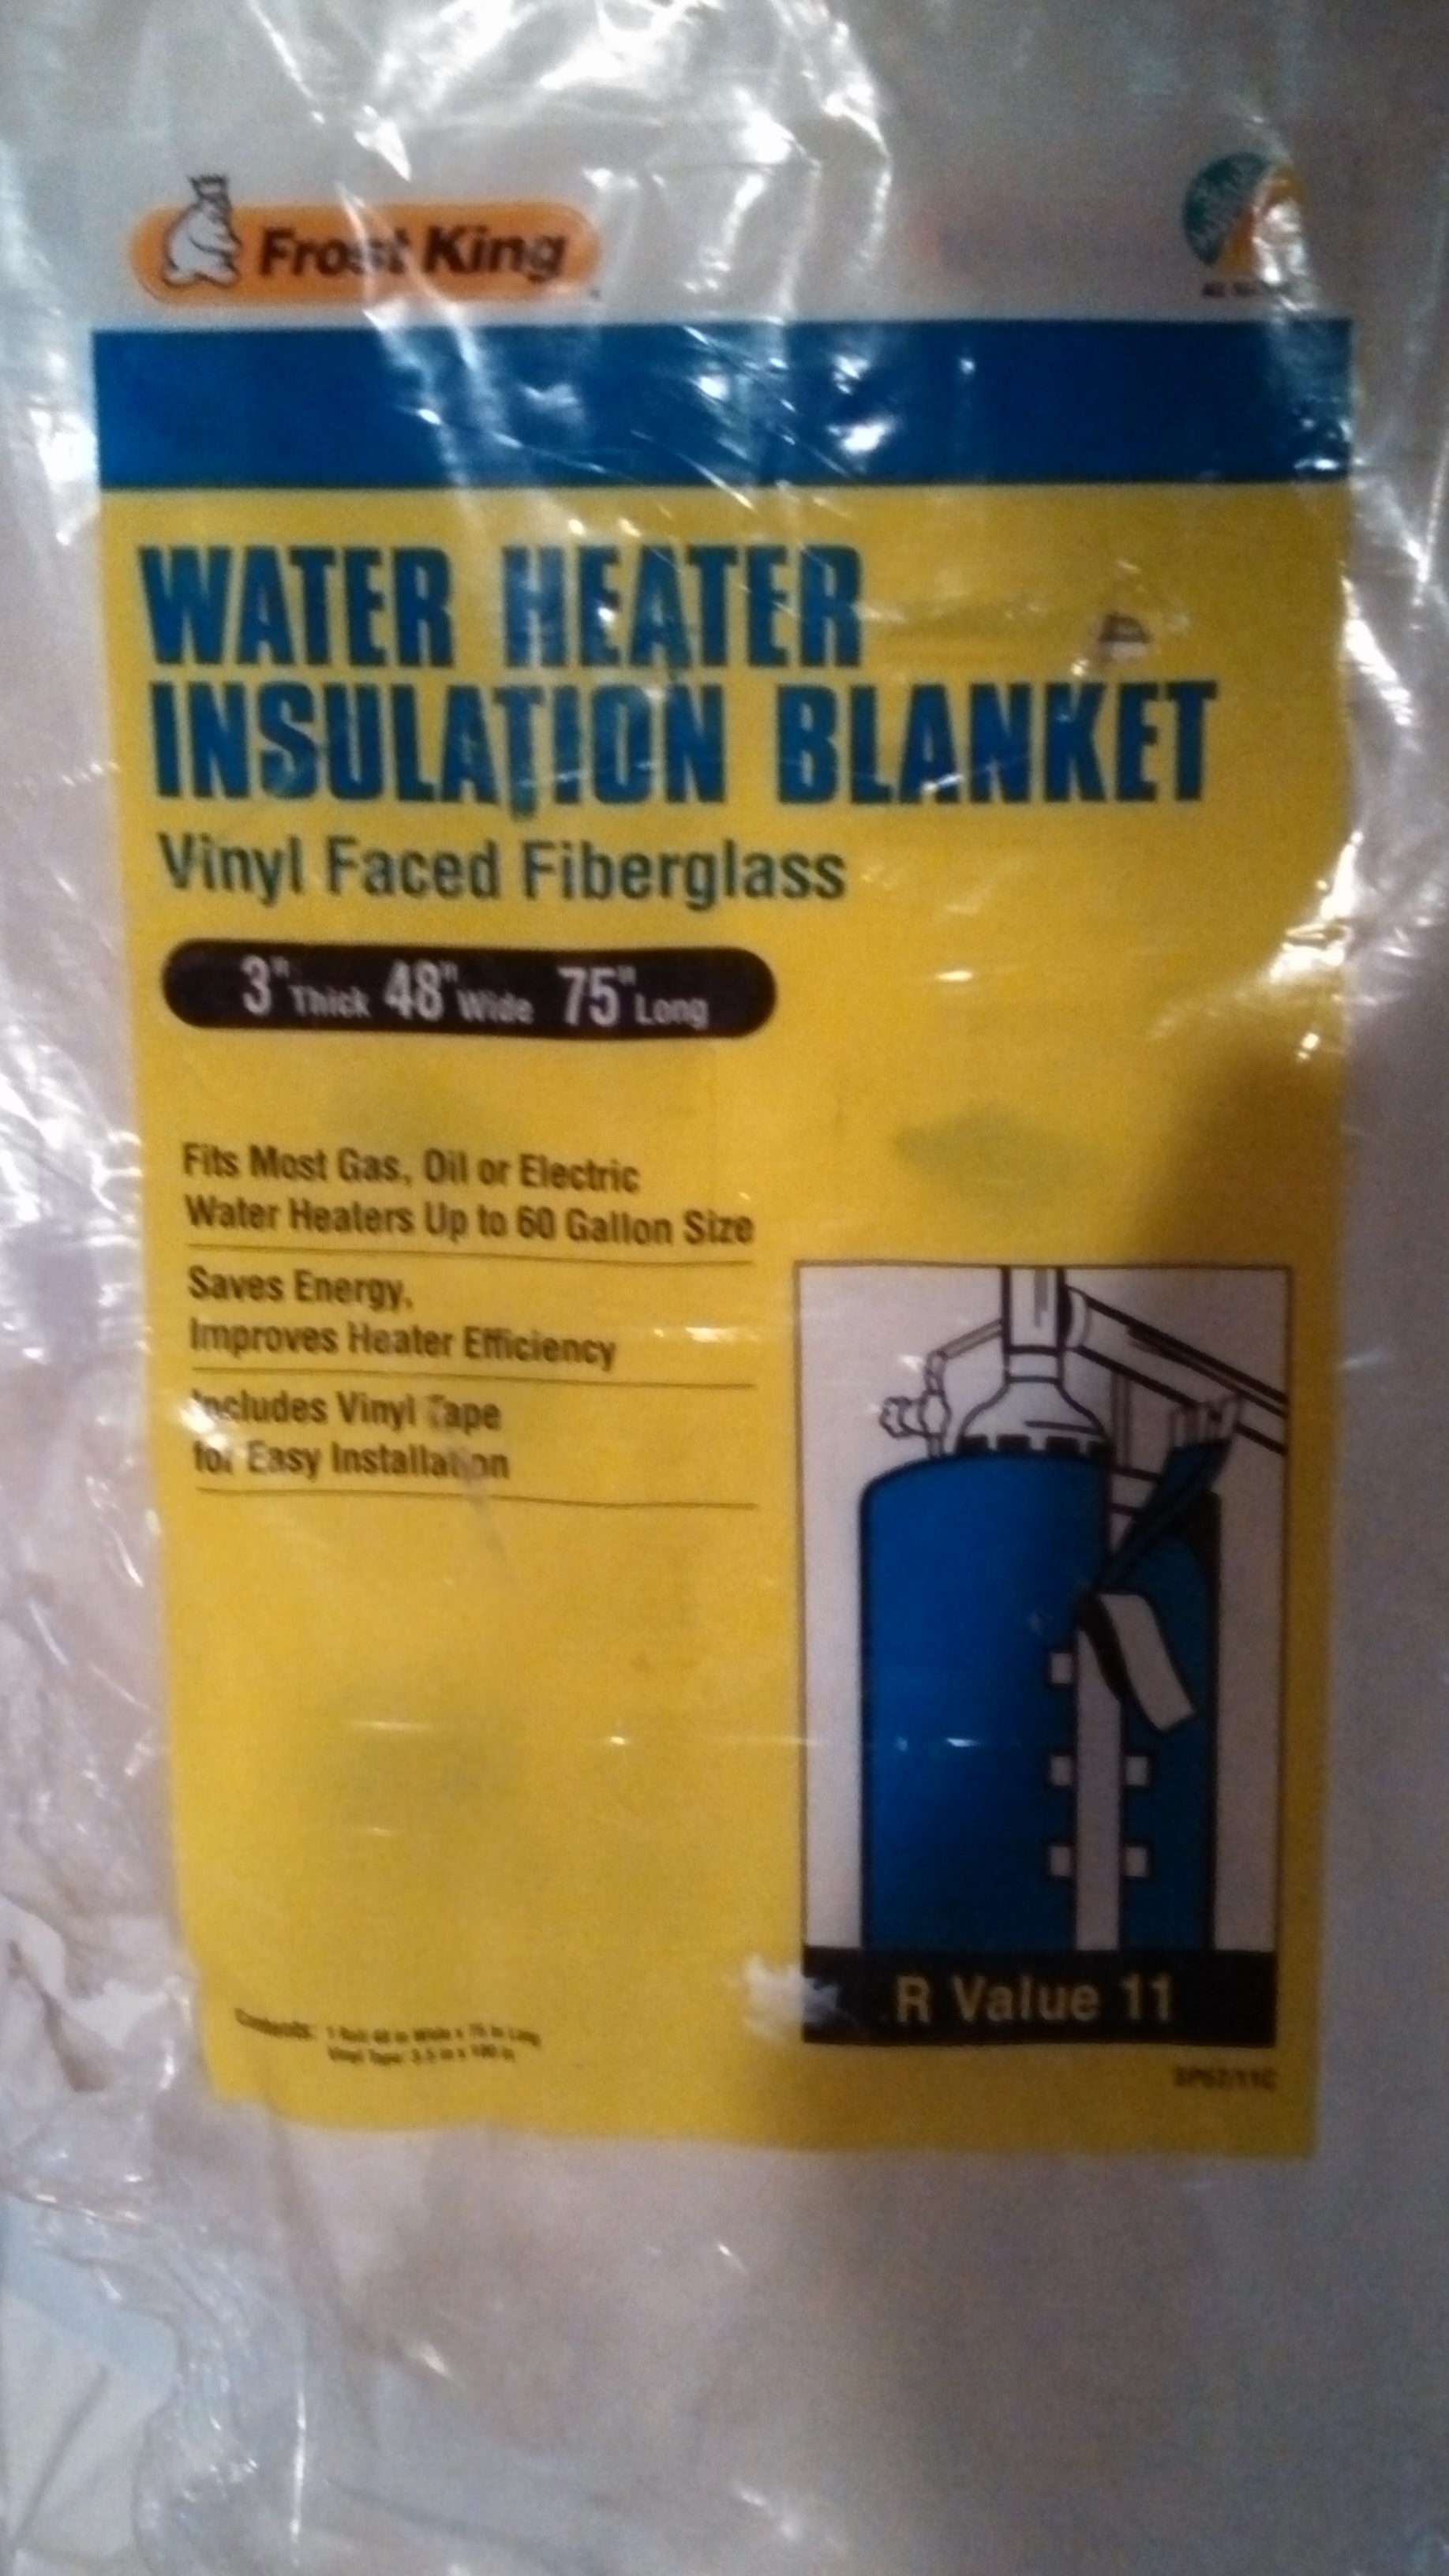 Is a Water Heater Blanket Worth It to Save Money?